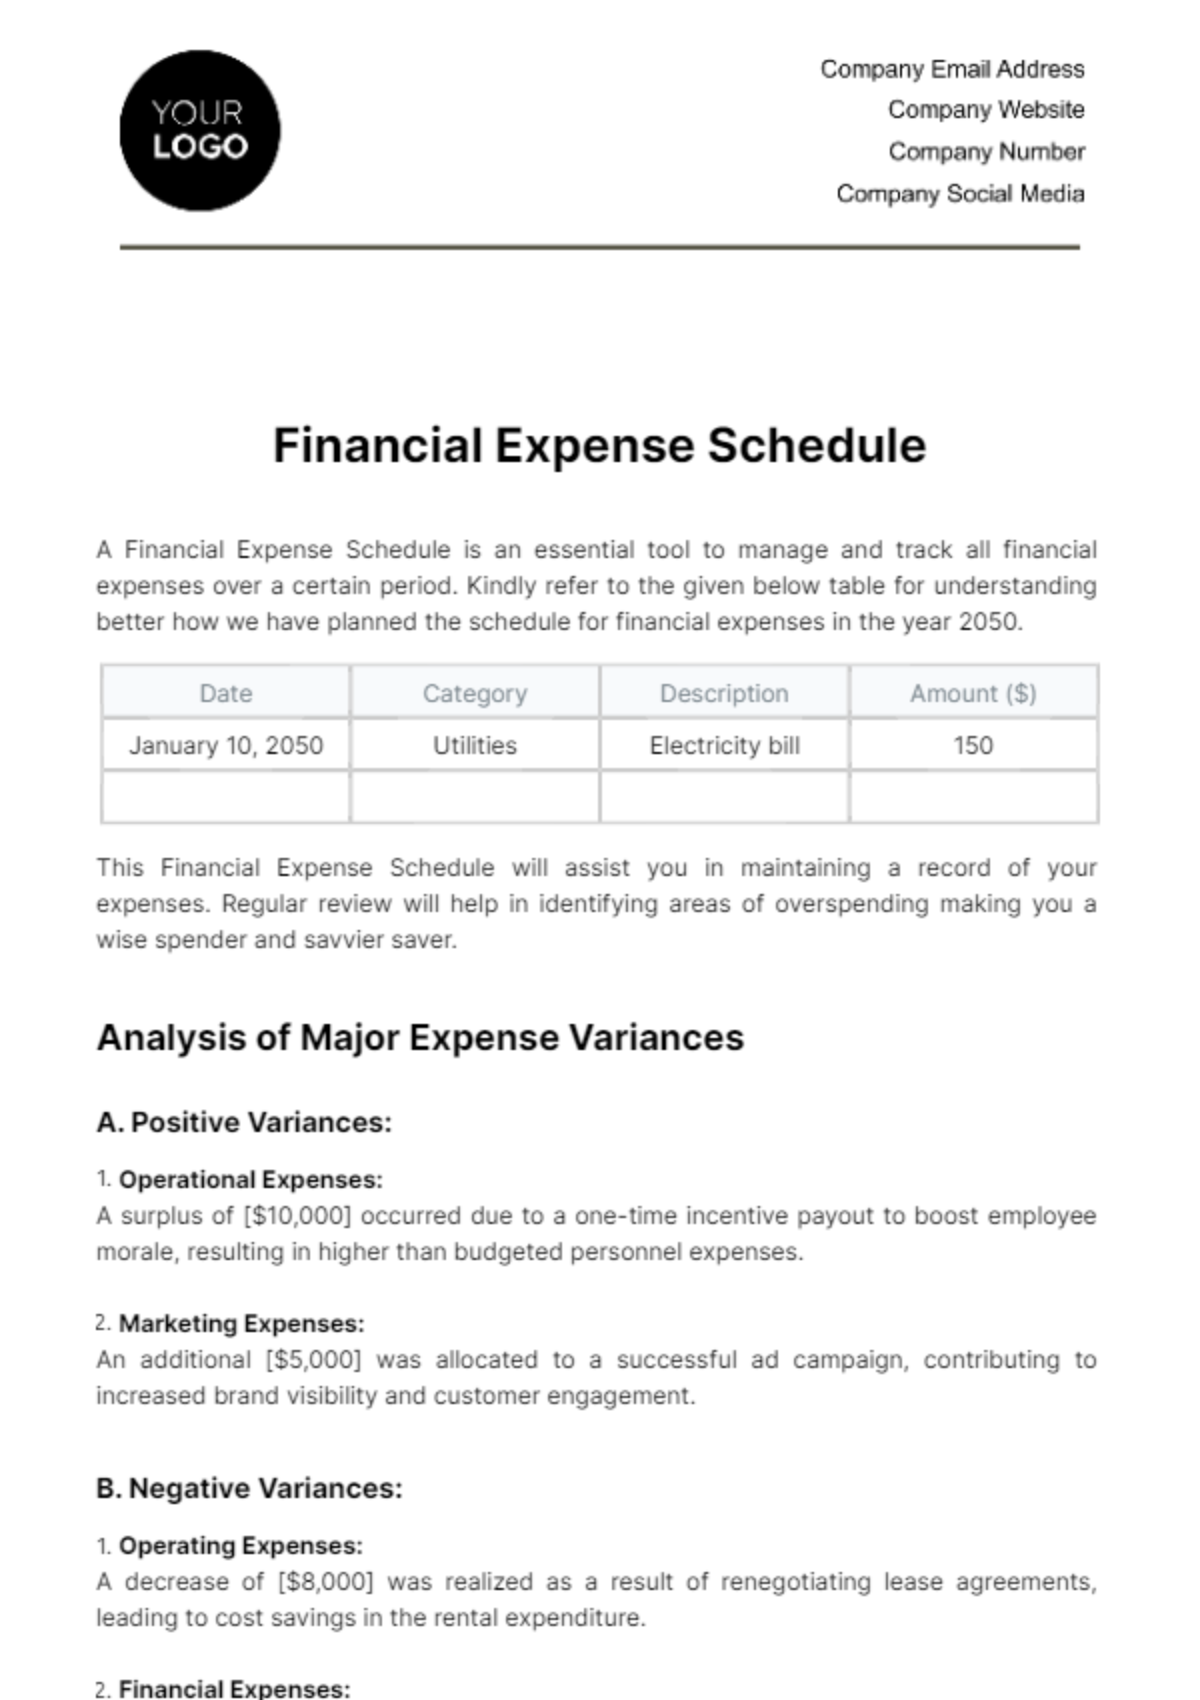 Free Financial Expense Schedule Template